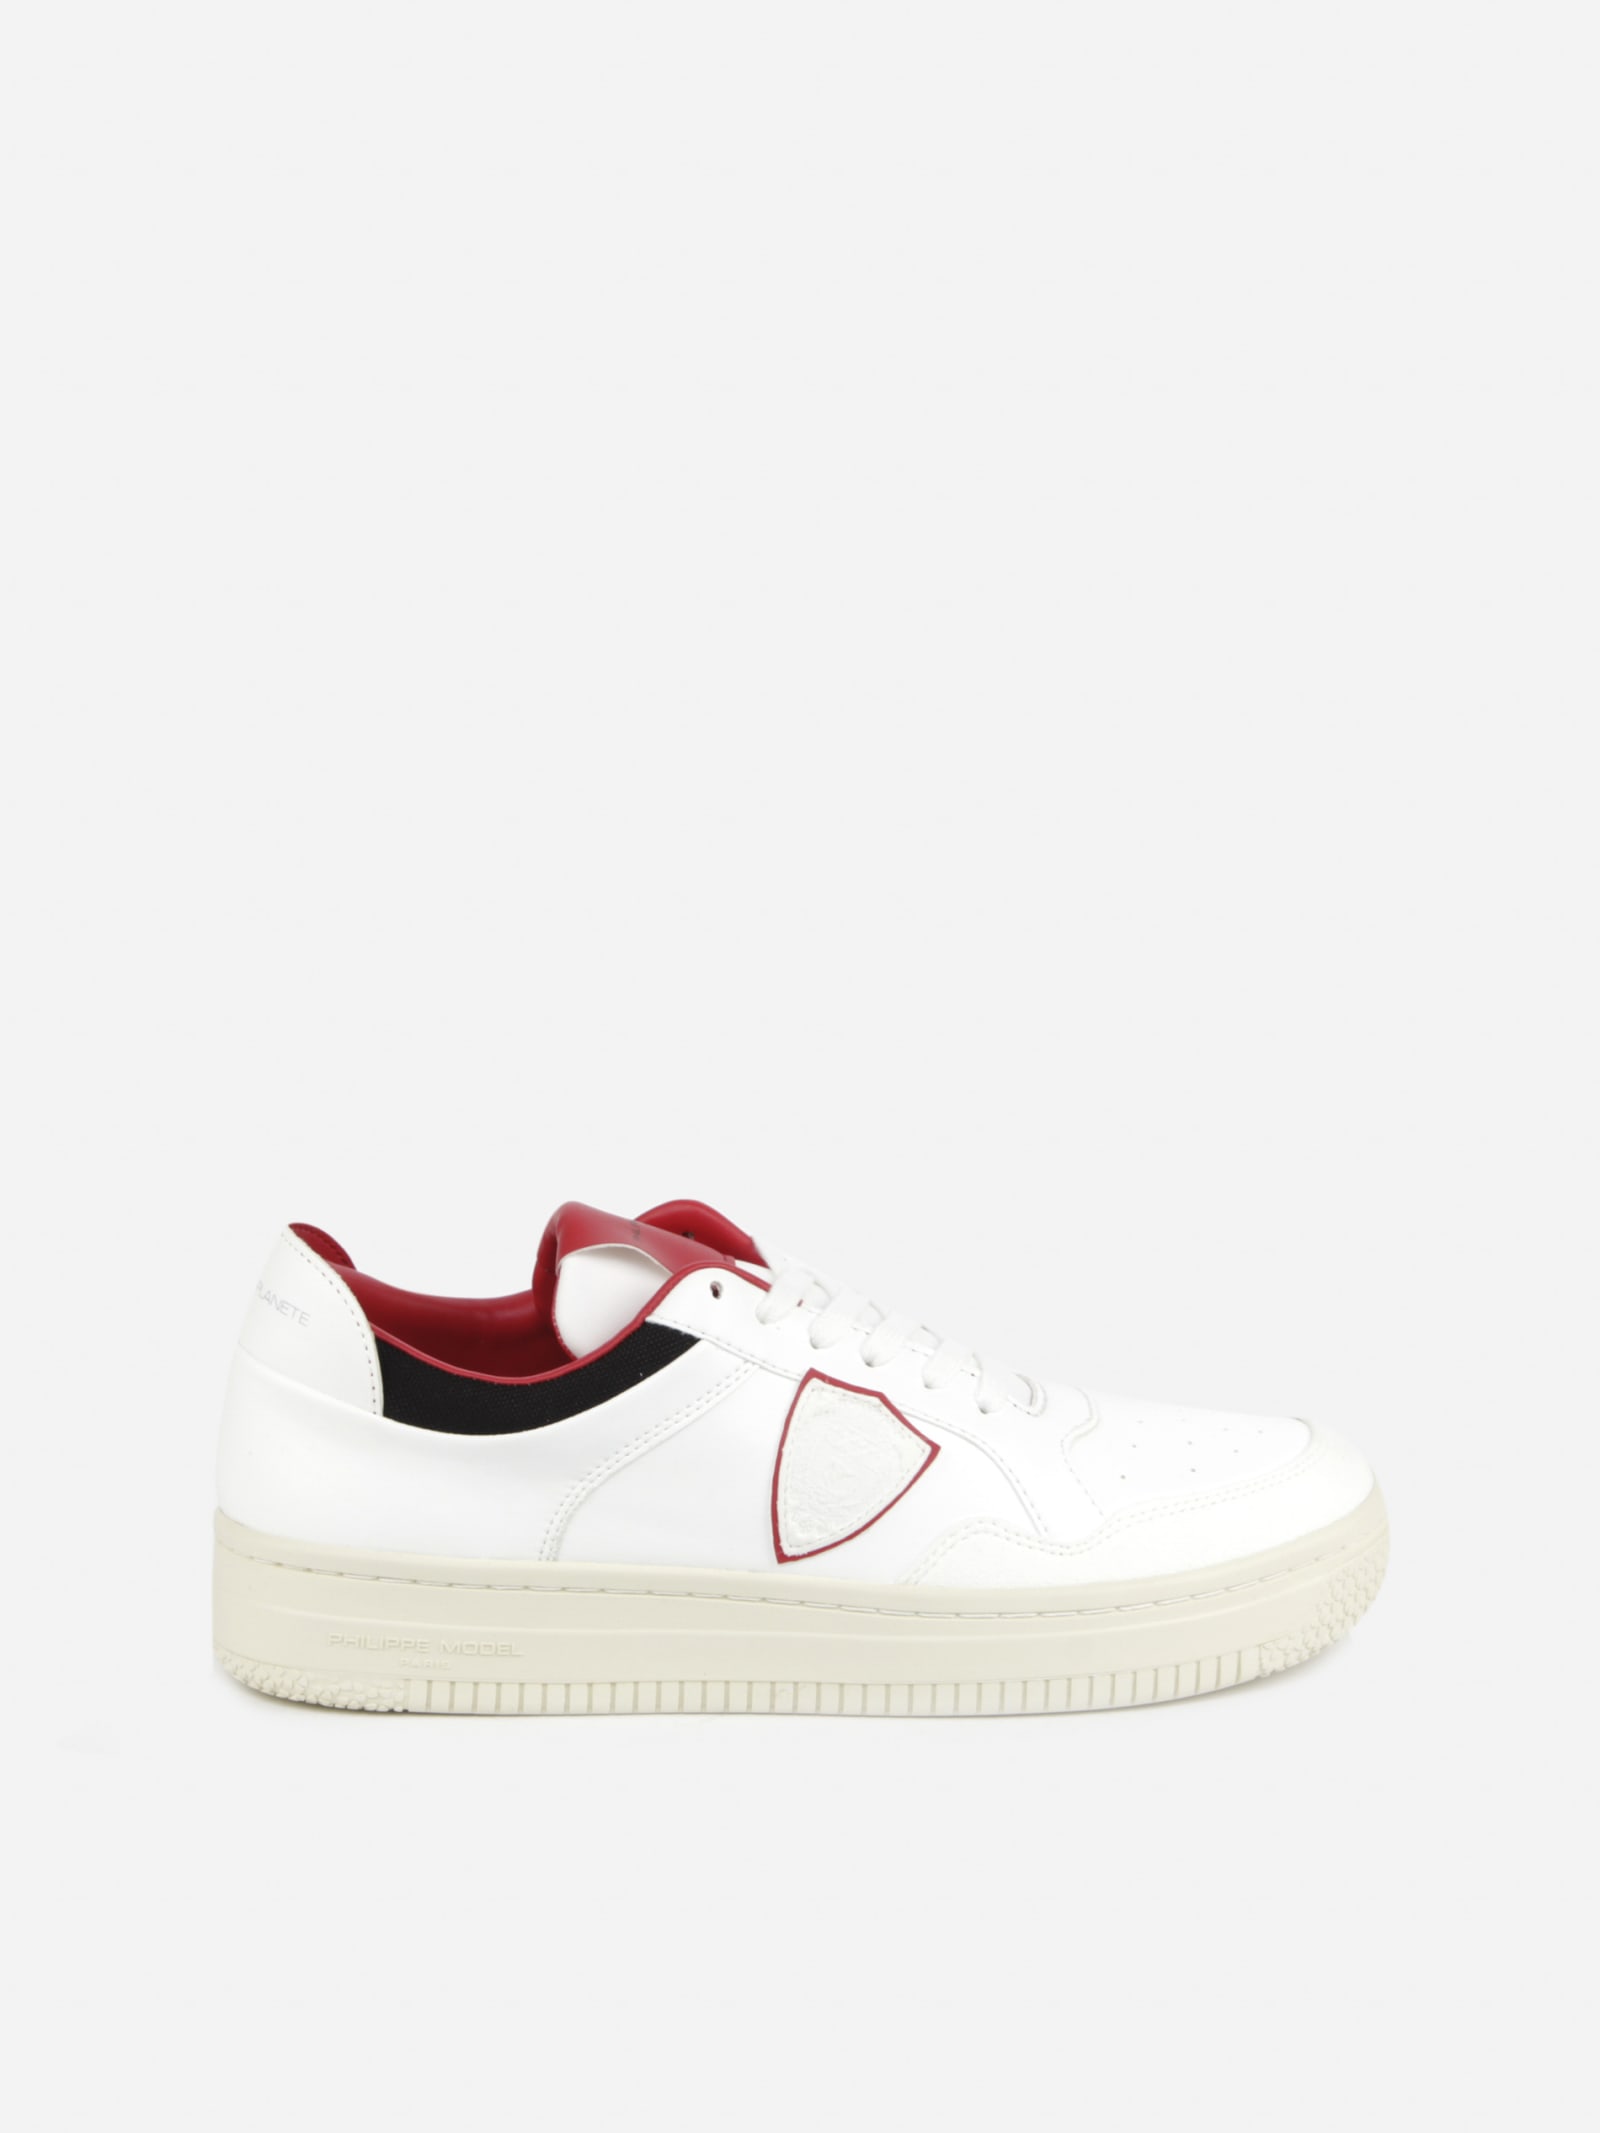 Philippe Model Vegan Leather Sneakers With Contrasting Inserts